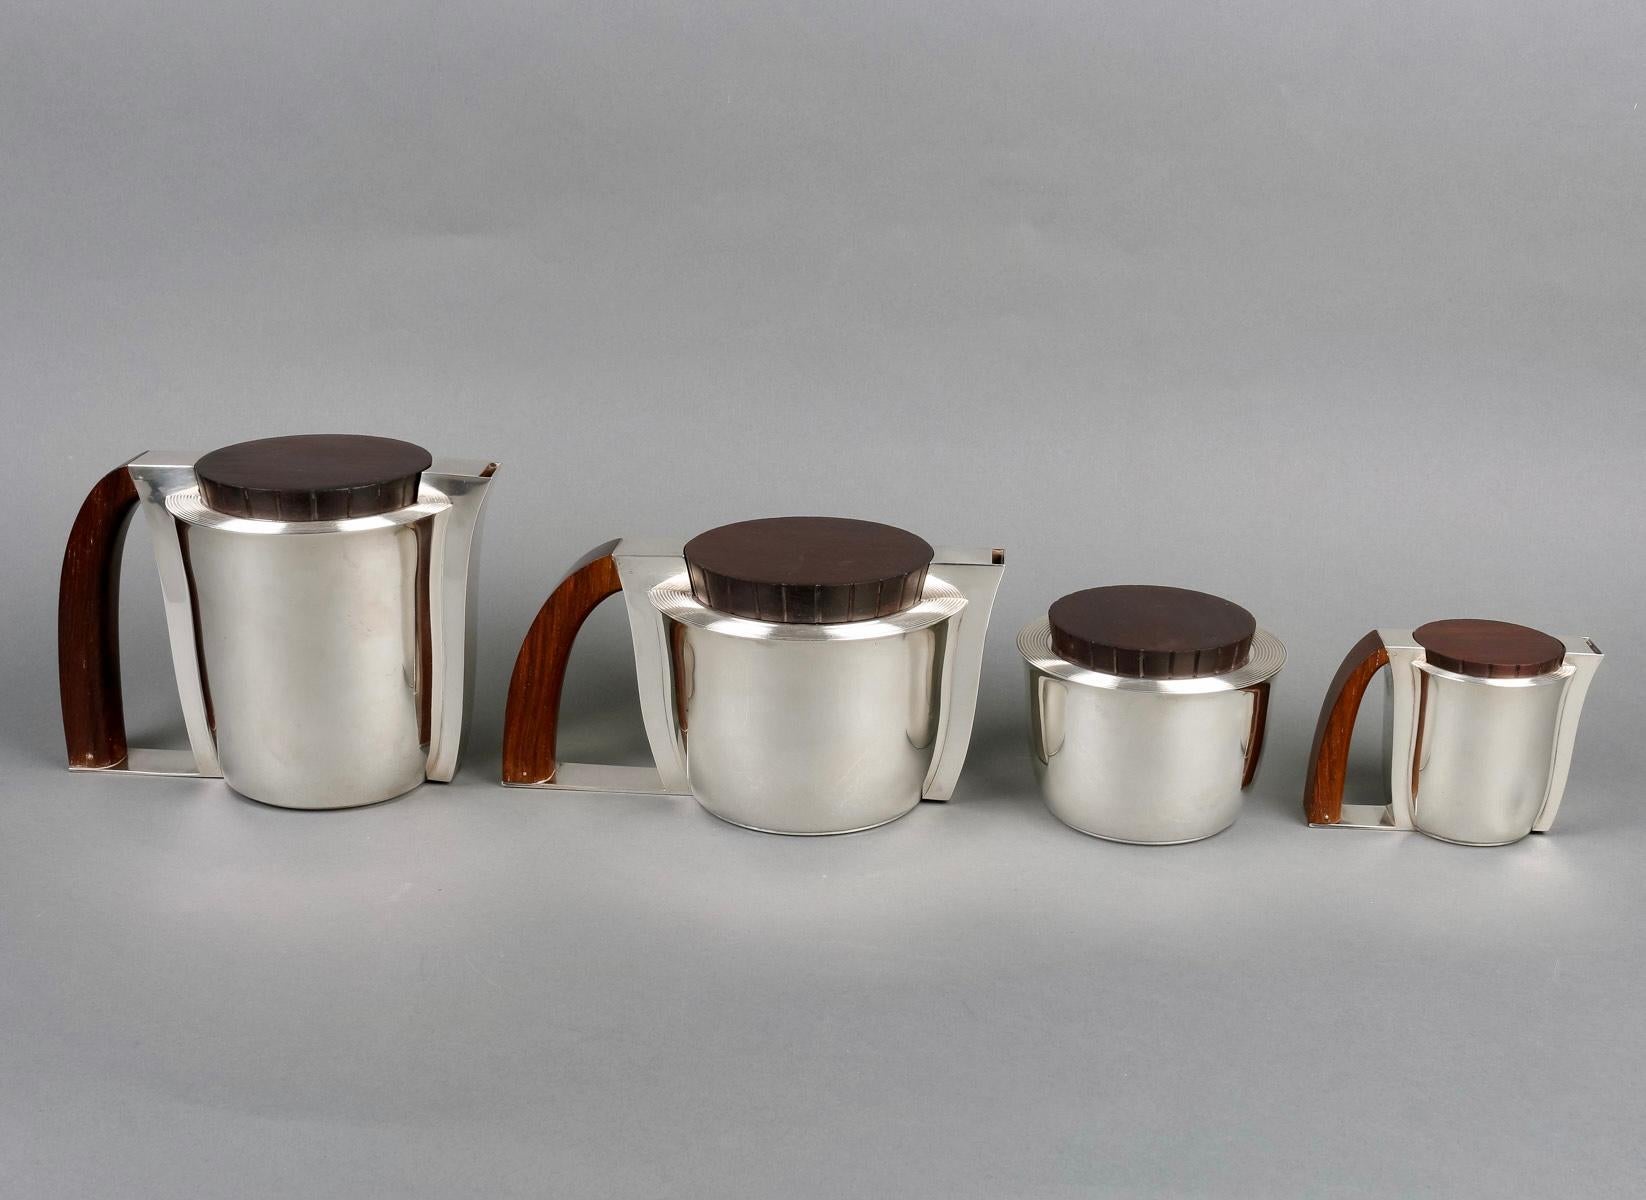 Modernist Art Deco tea and coffee set in sterling pure silver and rosewood by Jean E. Puiforcat created in 1935. 

Service including:
- a coffee pot 
- a teapot
- a milkpot
- a sugar pot

Minerve Solid Silver 950/1000 French mark - maker's stamp on